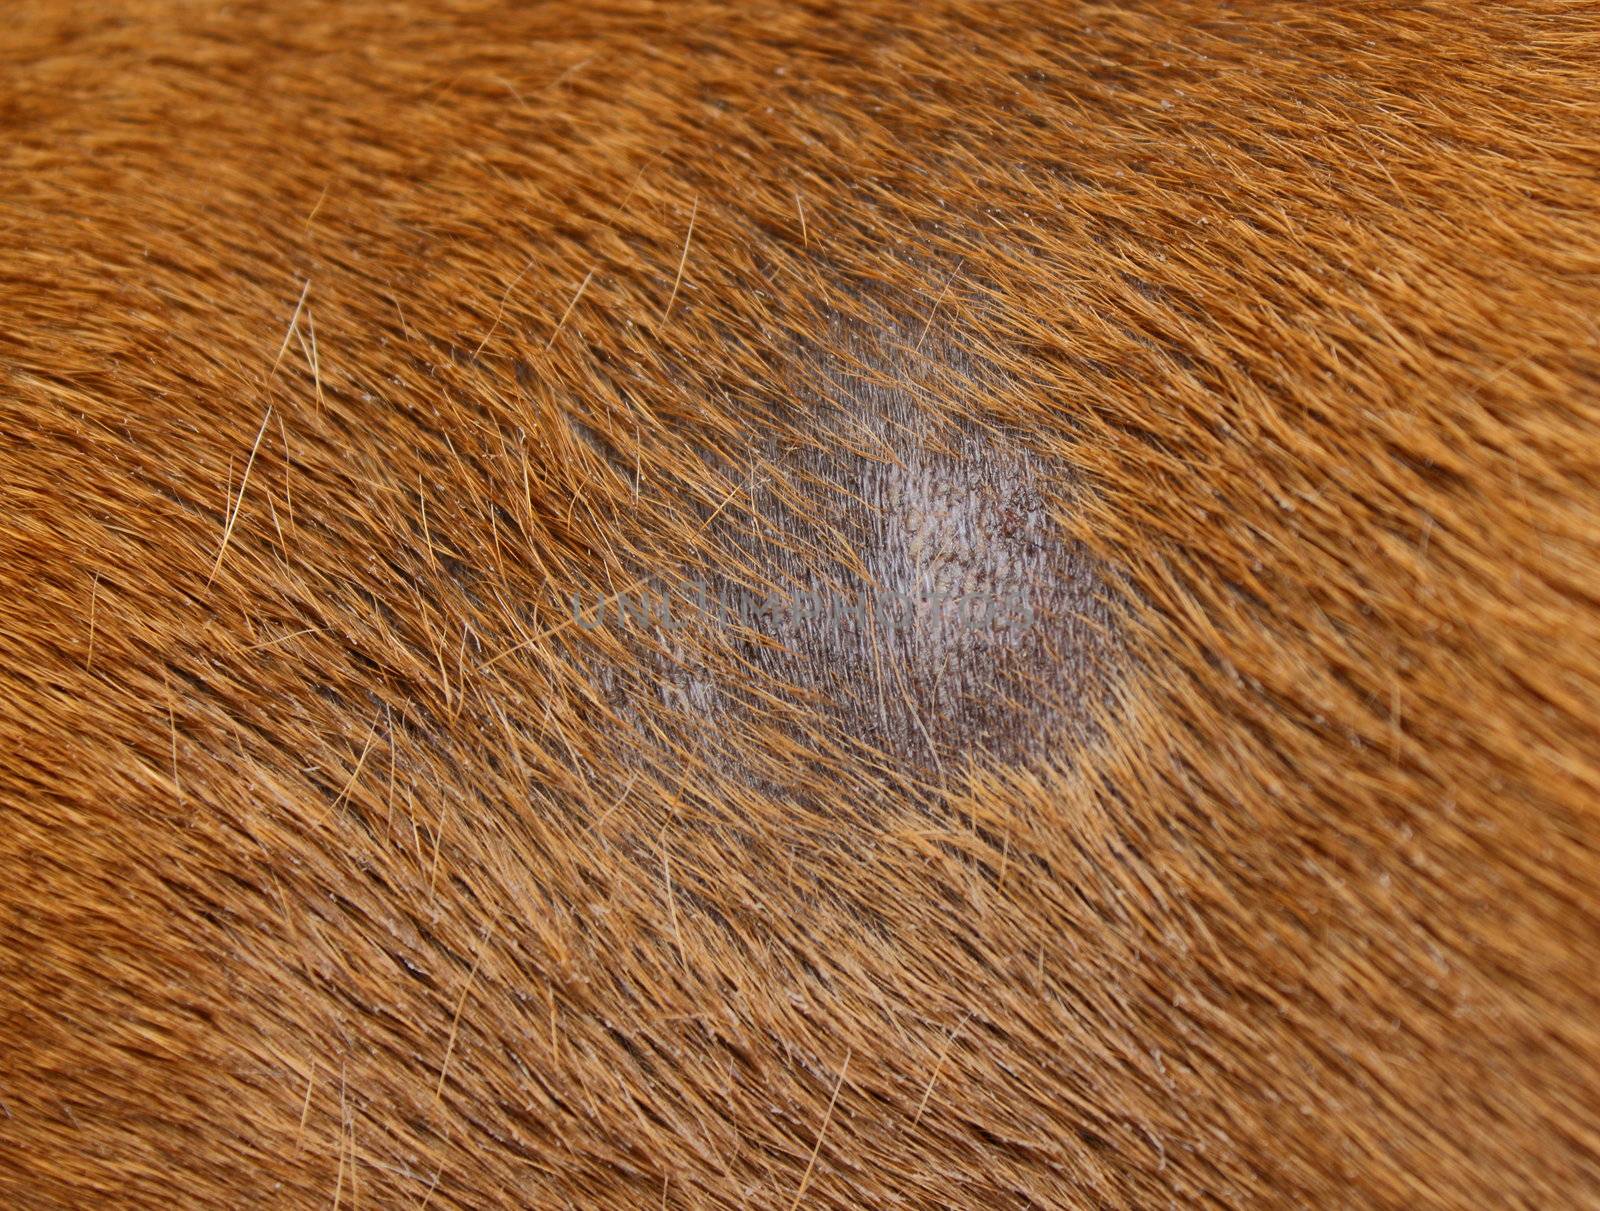 fungus infection on dog by taviphoto